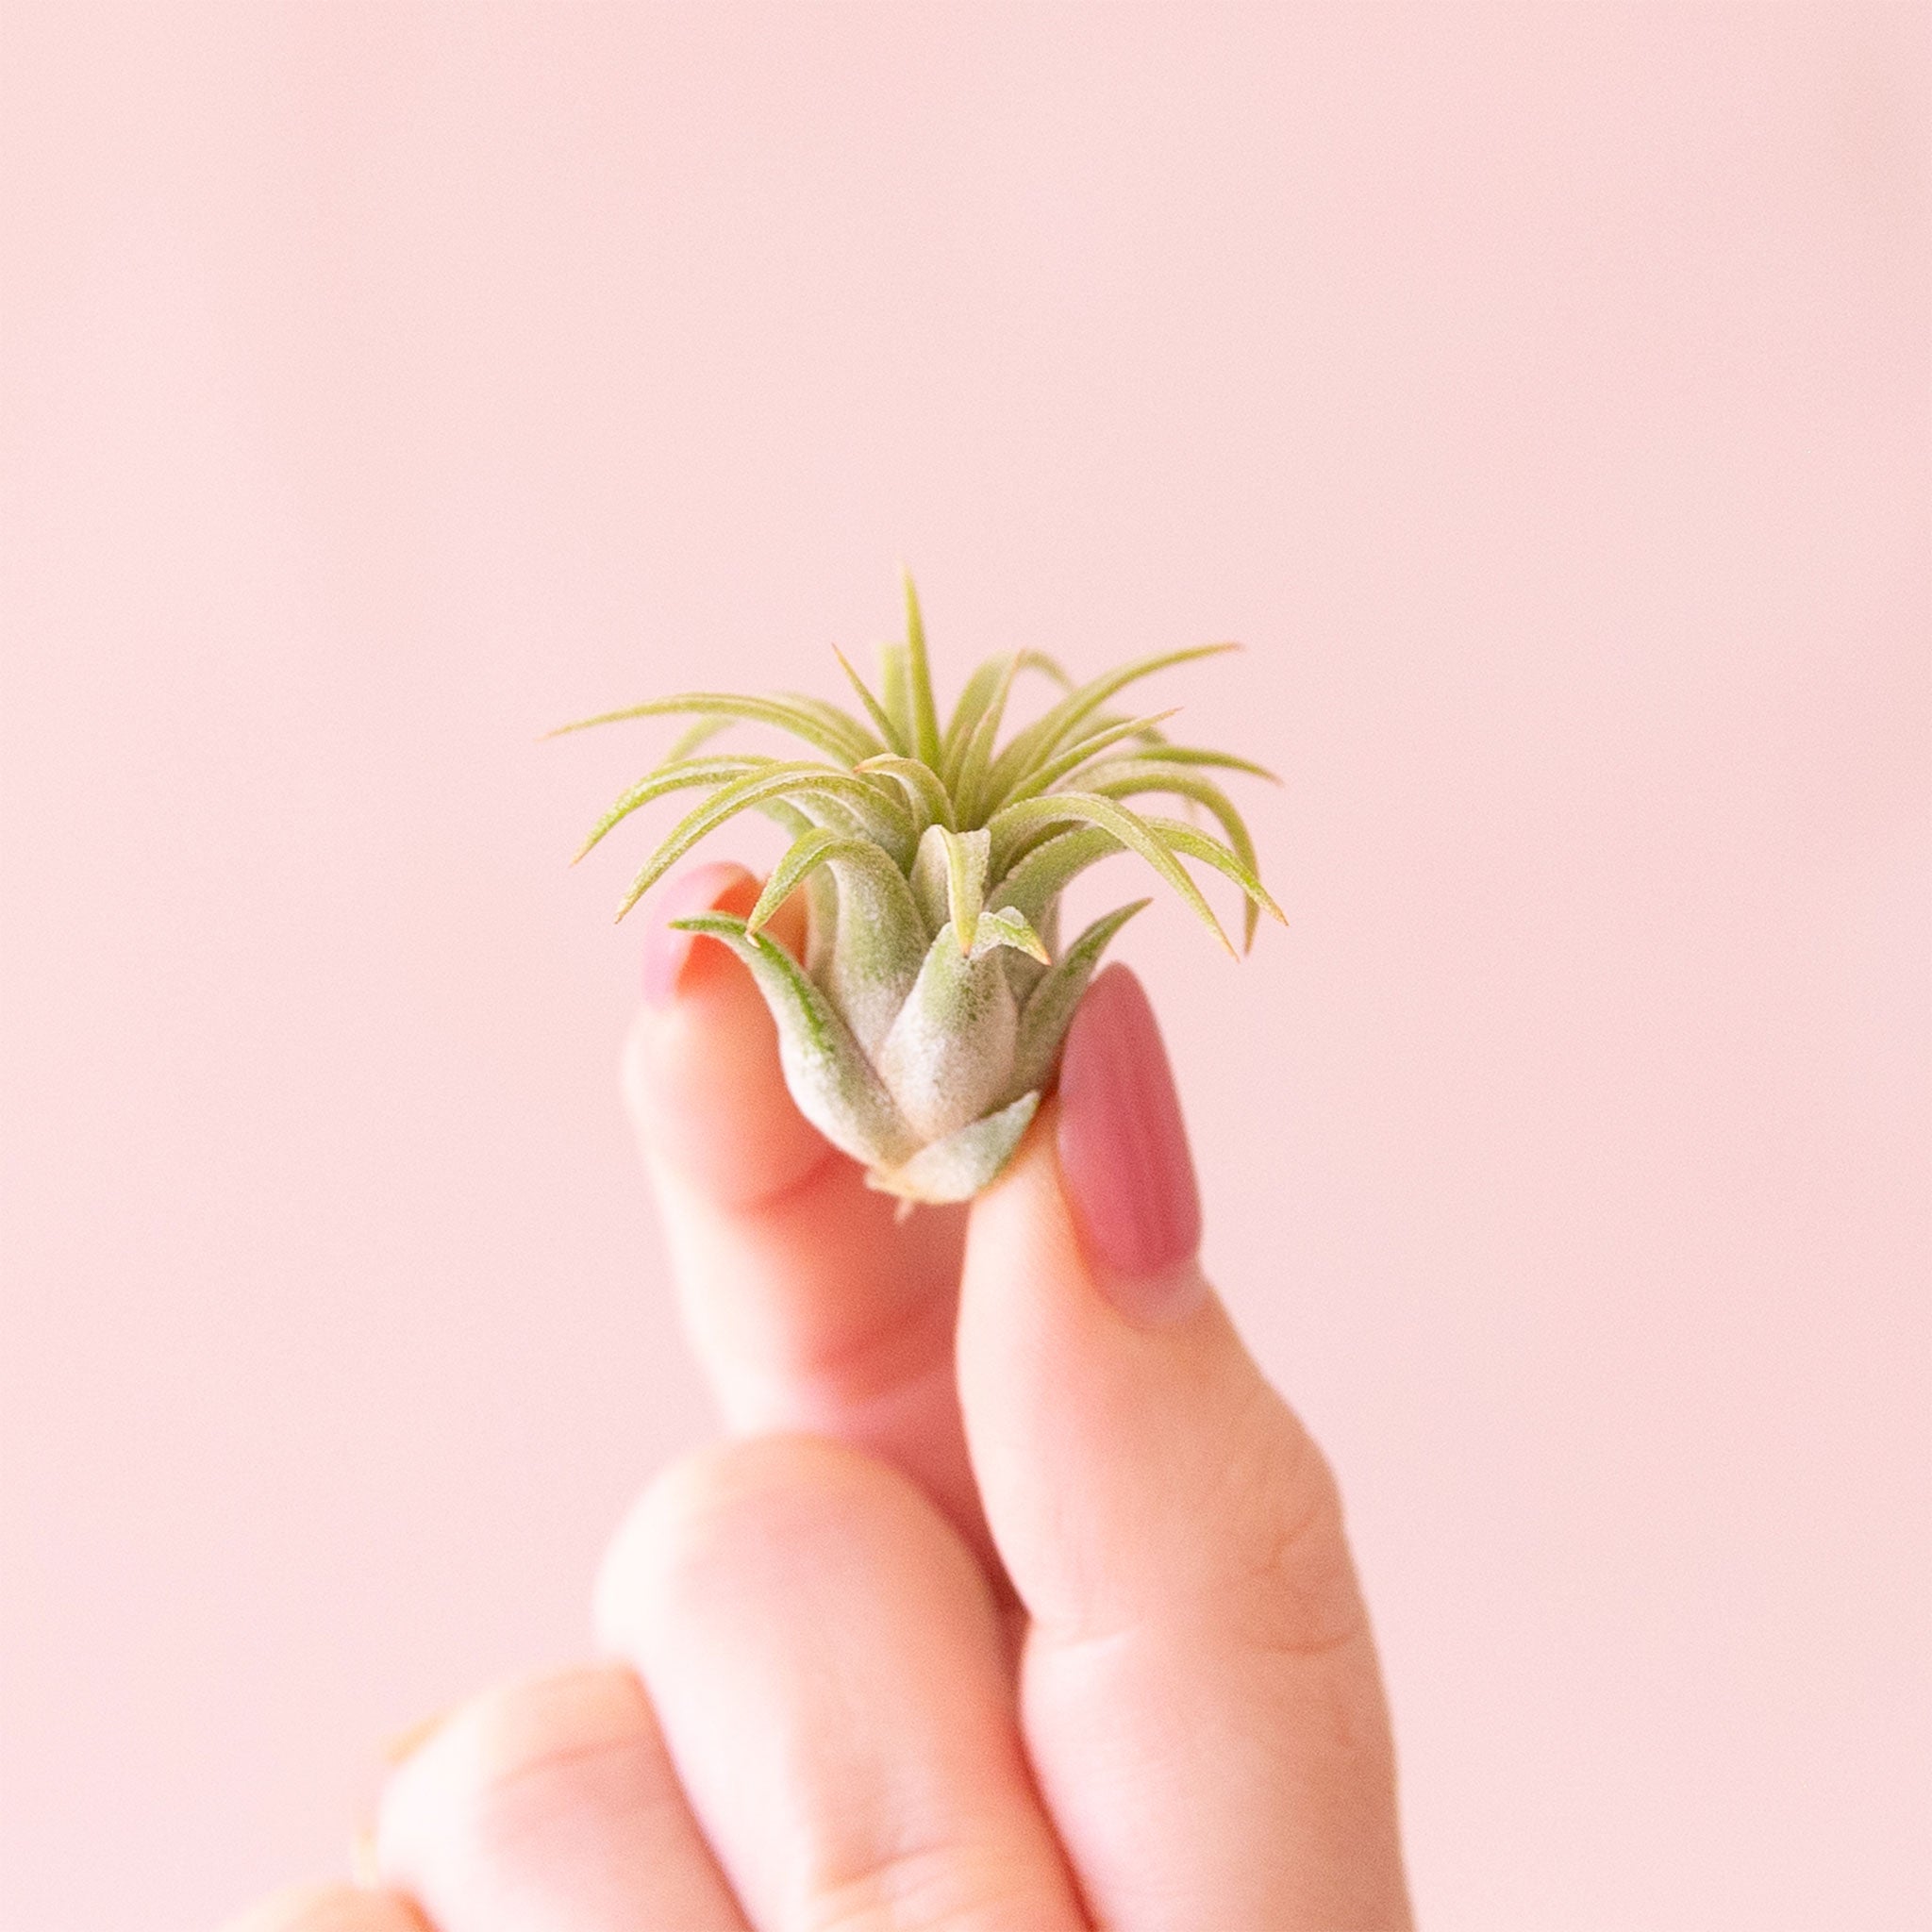 On a light pink background is a light green and orangey Tillandsia Ionantha Rubra air plant.